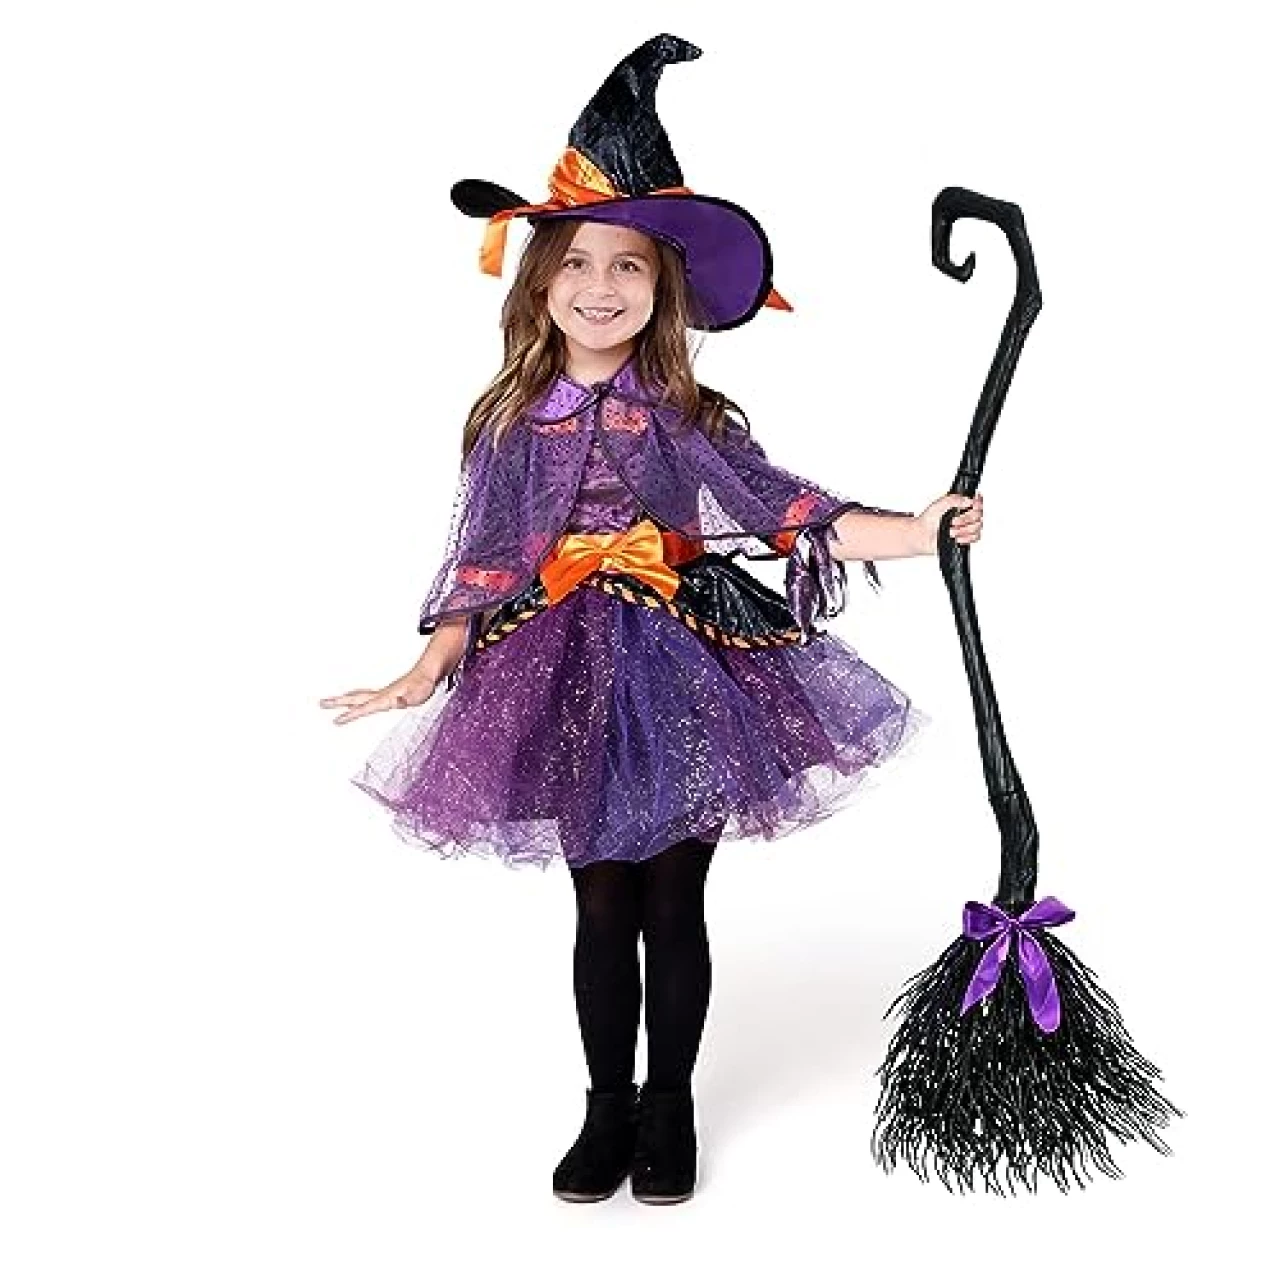 Spooktacular Creations Child Girl Orange Purple Witch costume with Broom for Girls Halloween Dress Up